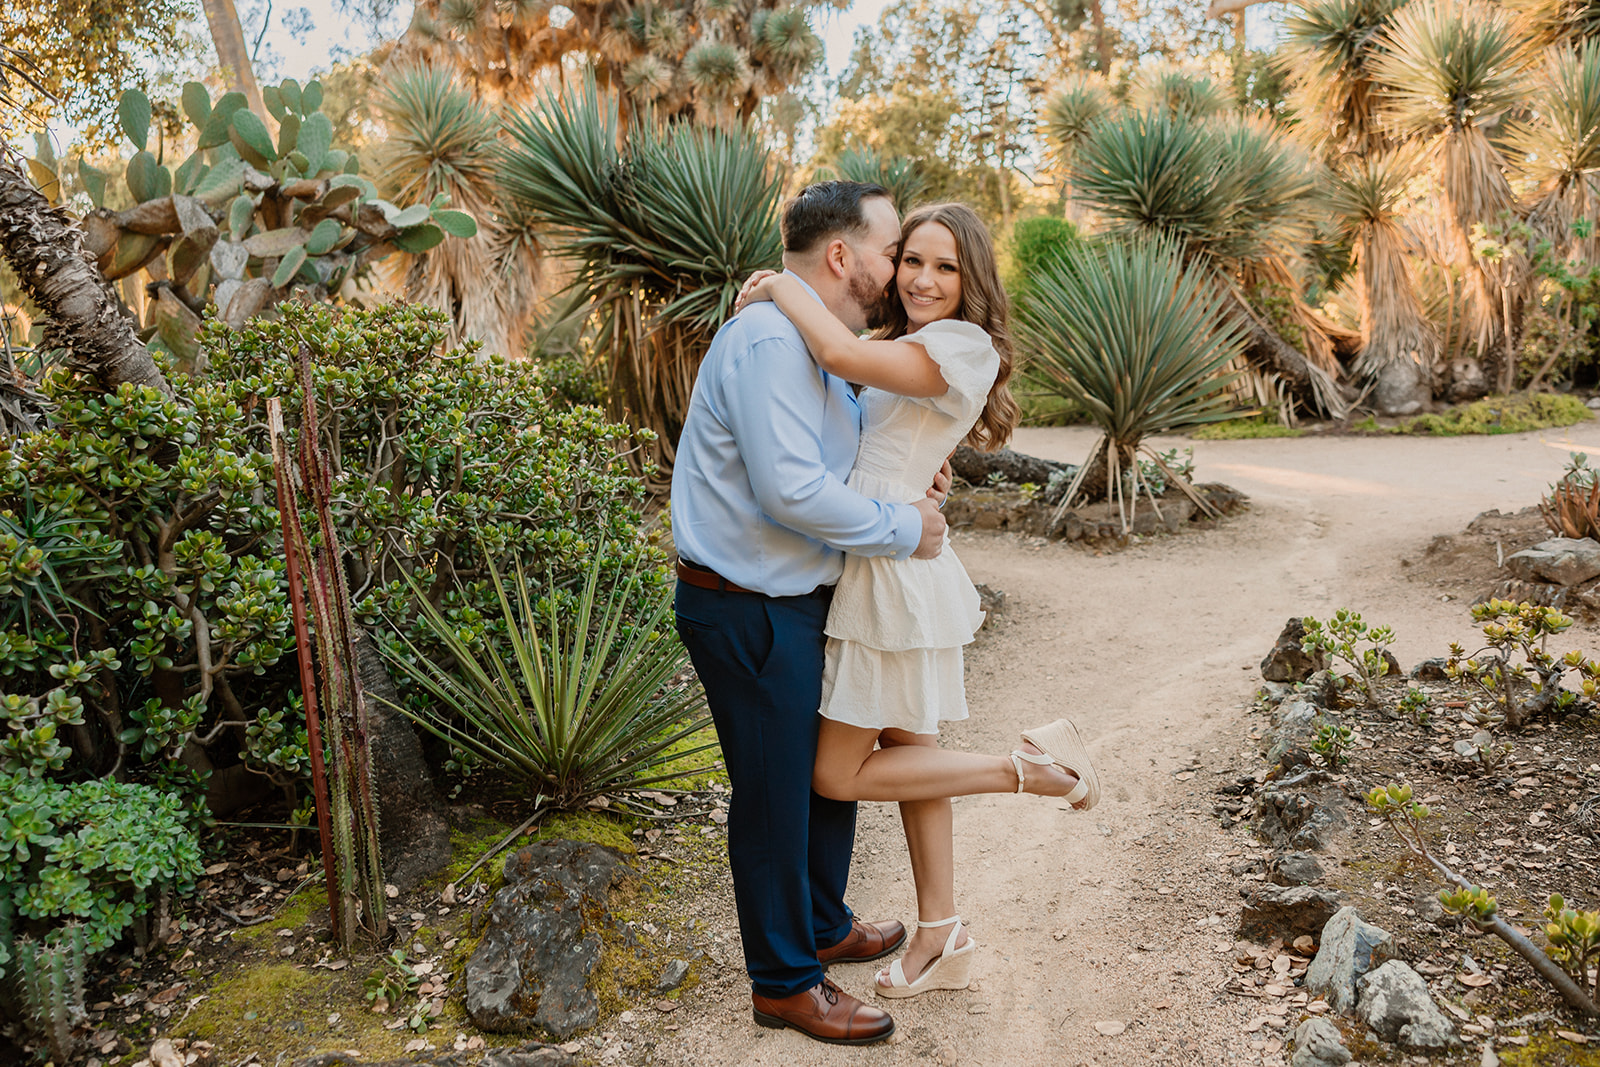 A couple embraces on a dirt path surrounded by lush greenery and various plants. The woman wears a white dress and lifts one leg, while the man wears a blue shirt and dark pants at their engagement photos at cactus garden in stanford